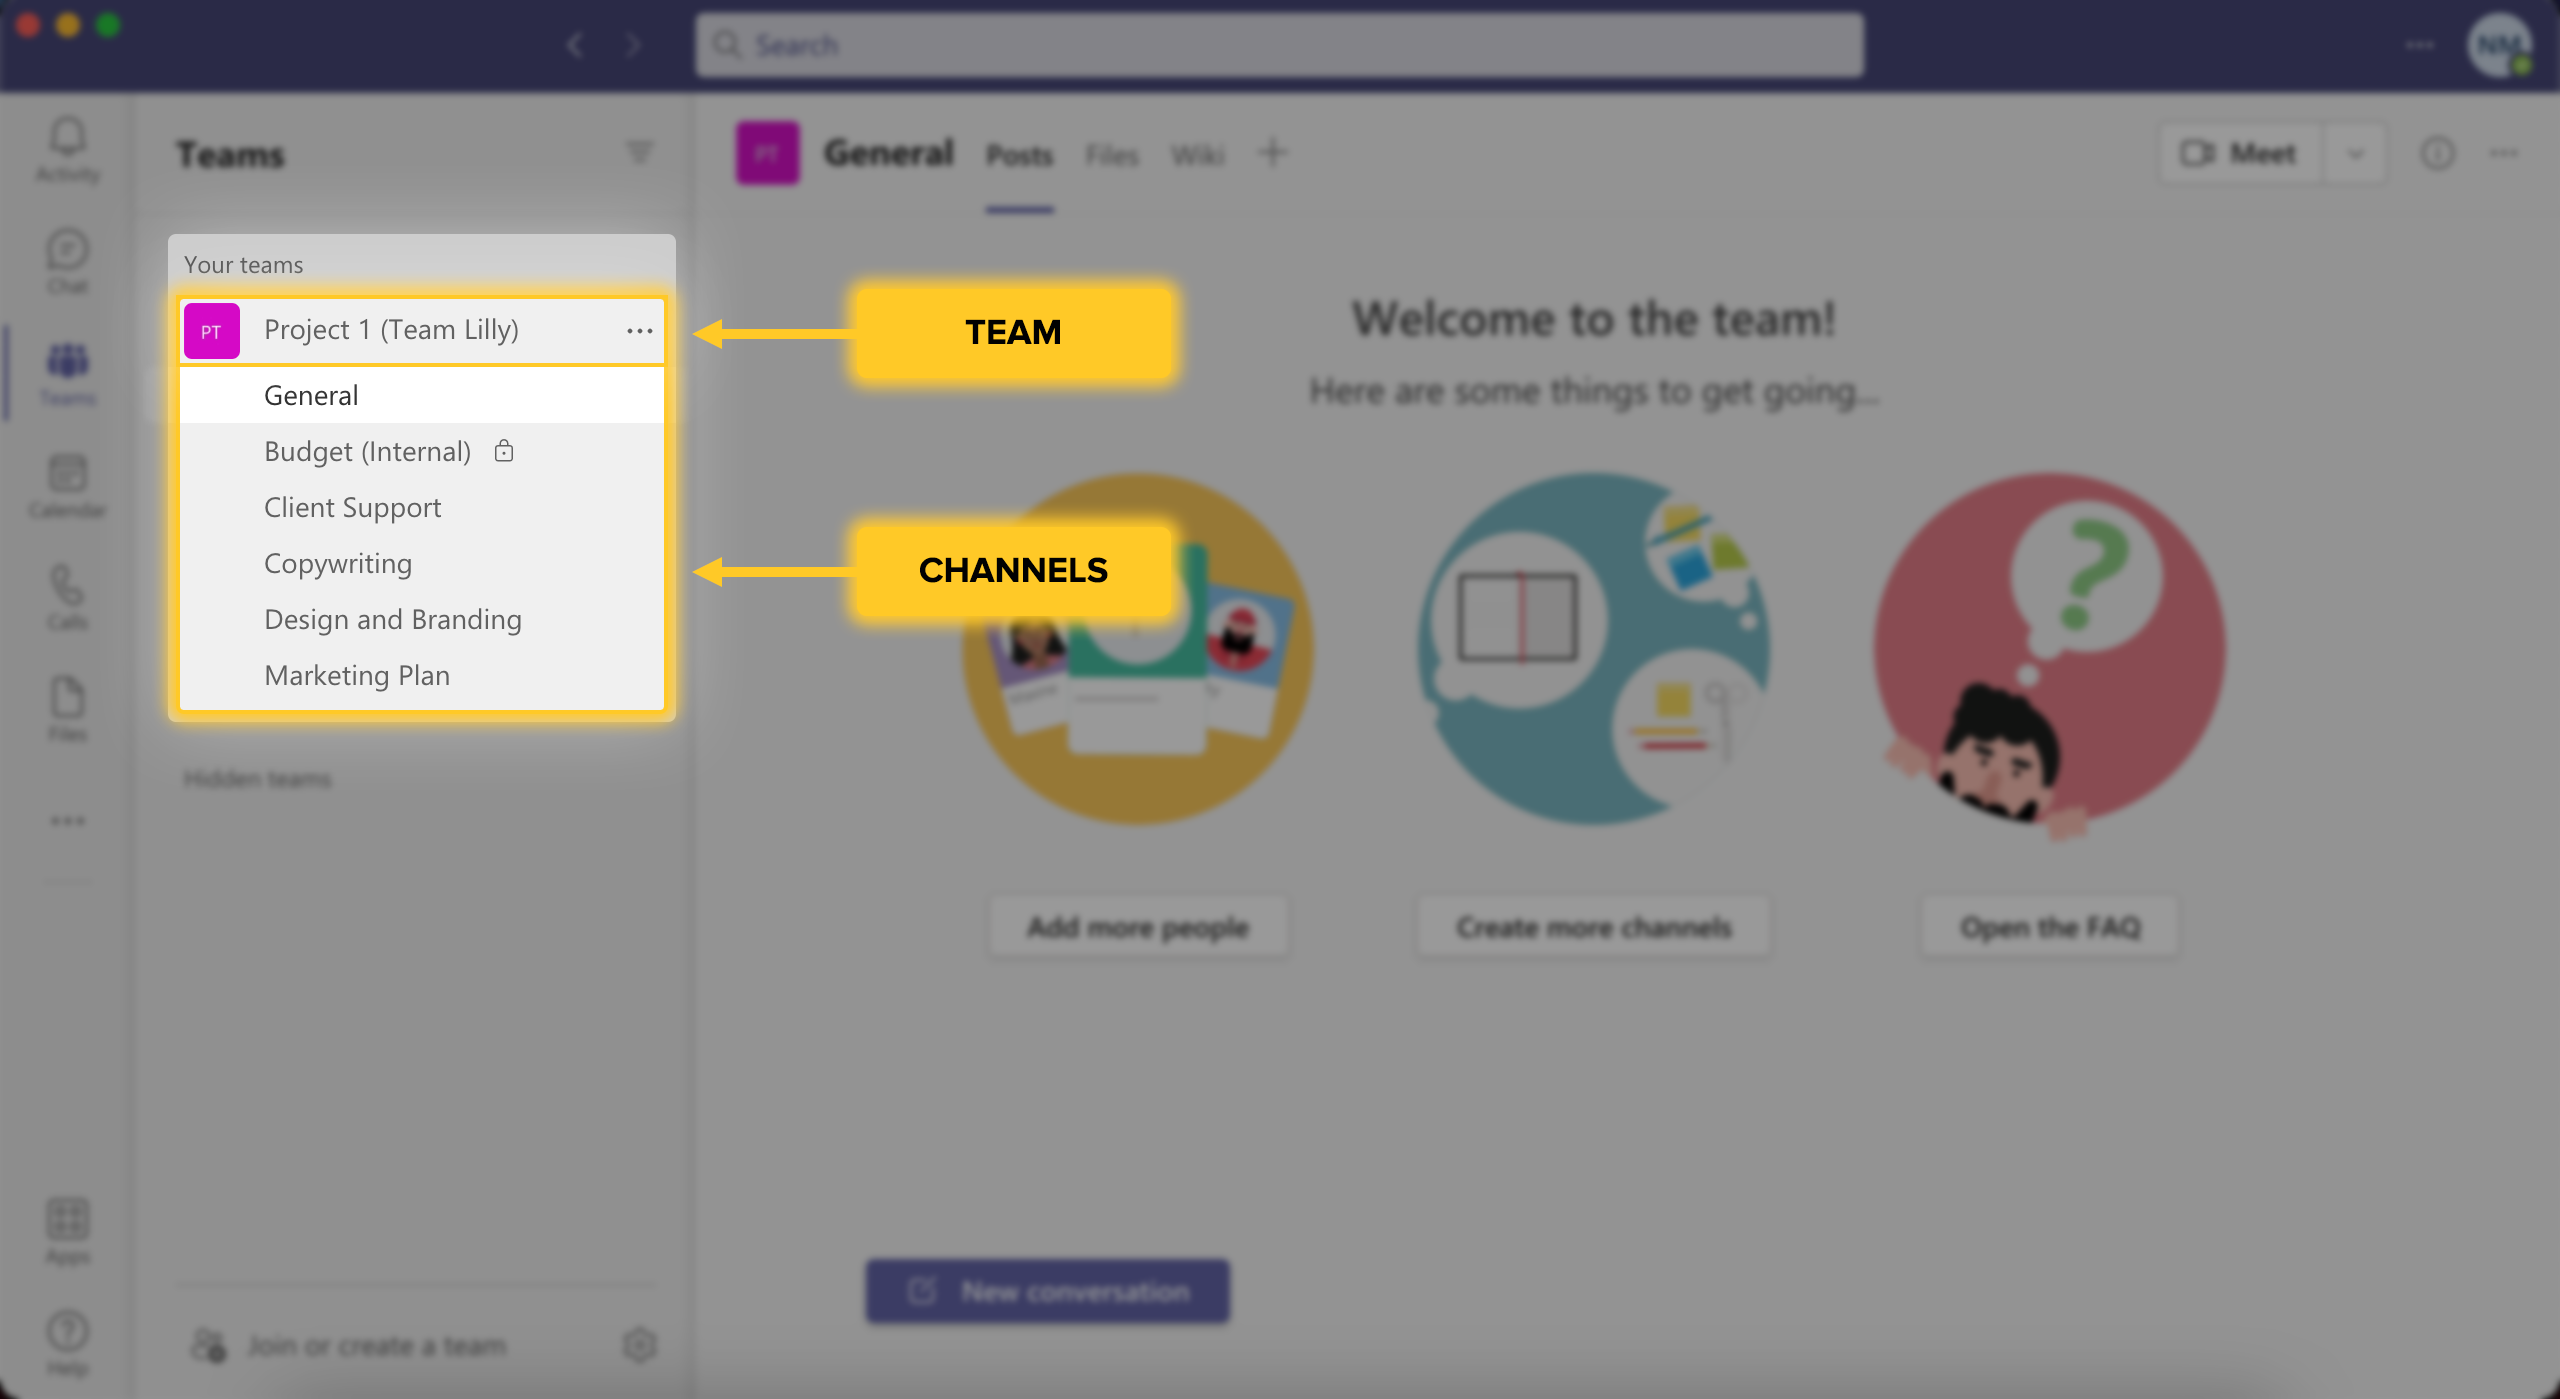 So what are Microsoft Teams channels?